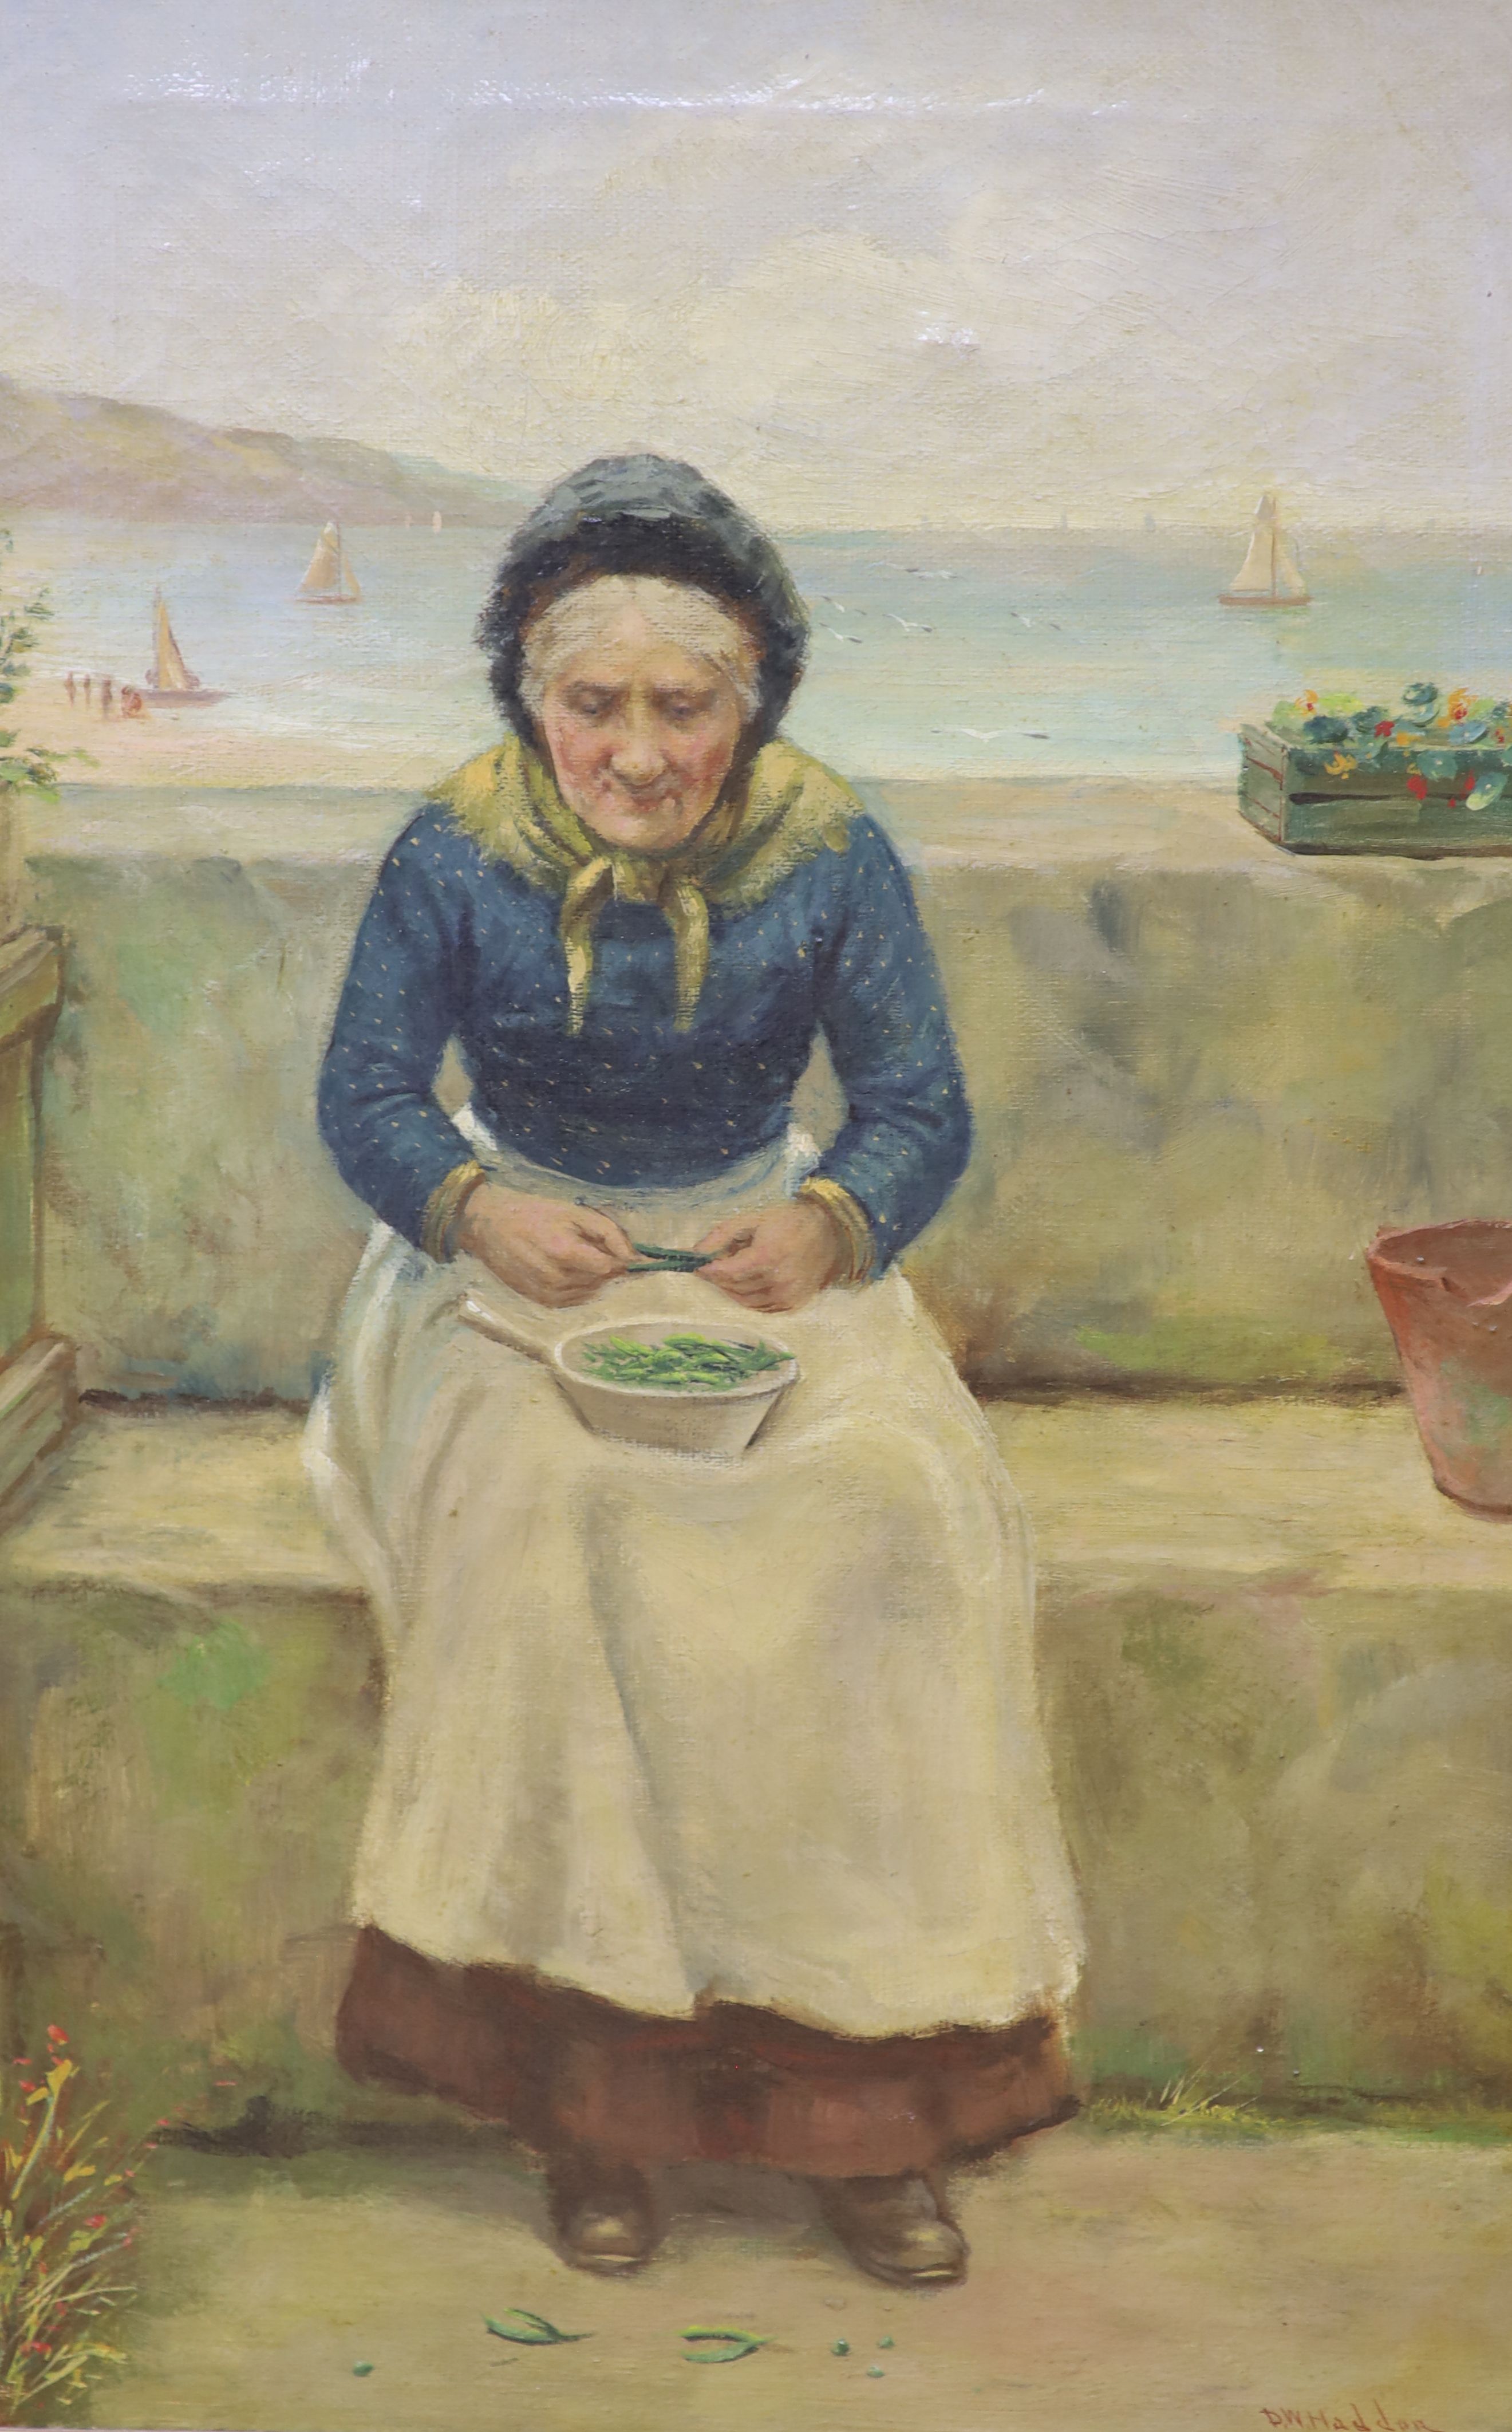 David W. Haddon (active 1884-1911), Shelling Peas, signed, oil on canvas, 45 x 30cm